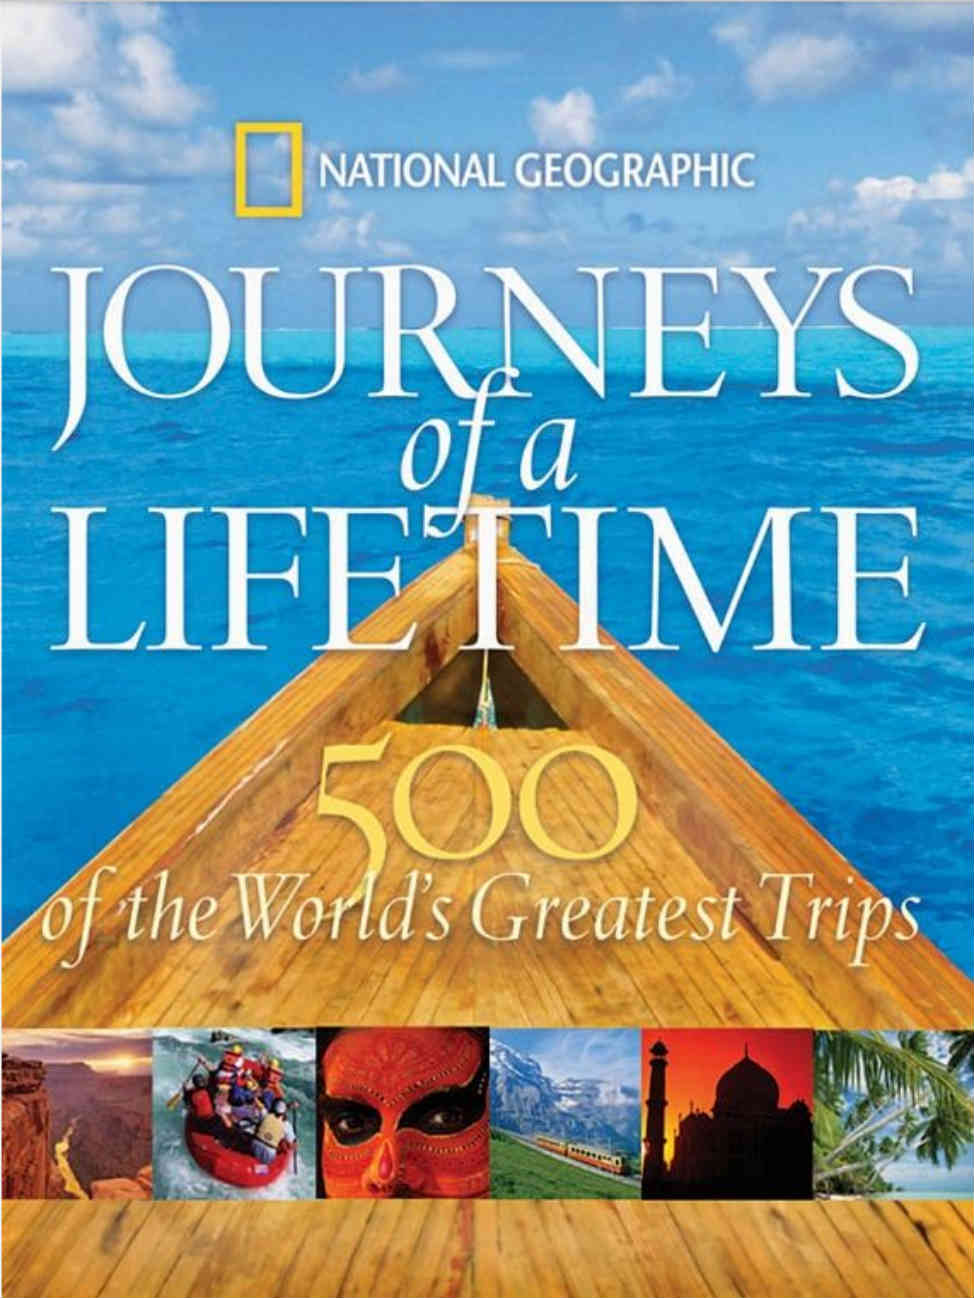 7 Top Travel Books 2015 – Become a Well Read Traveler – Planet and Go